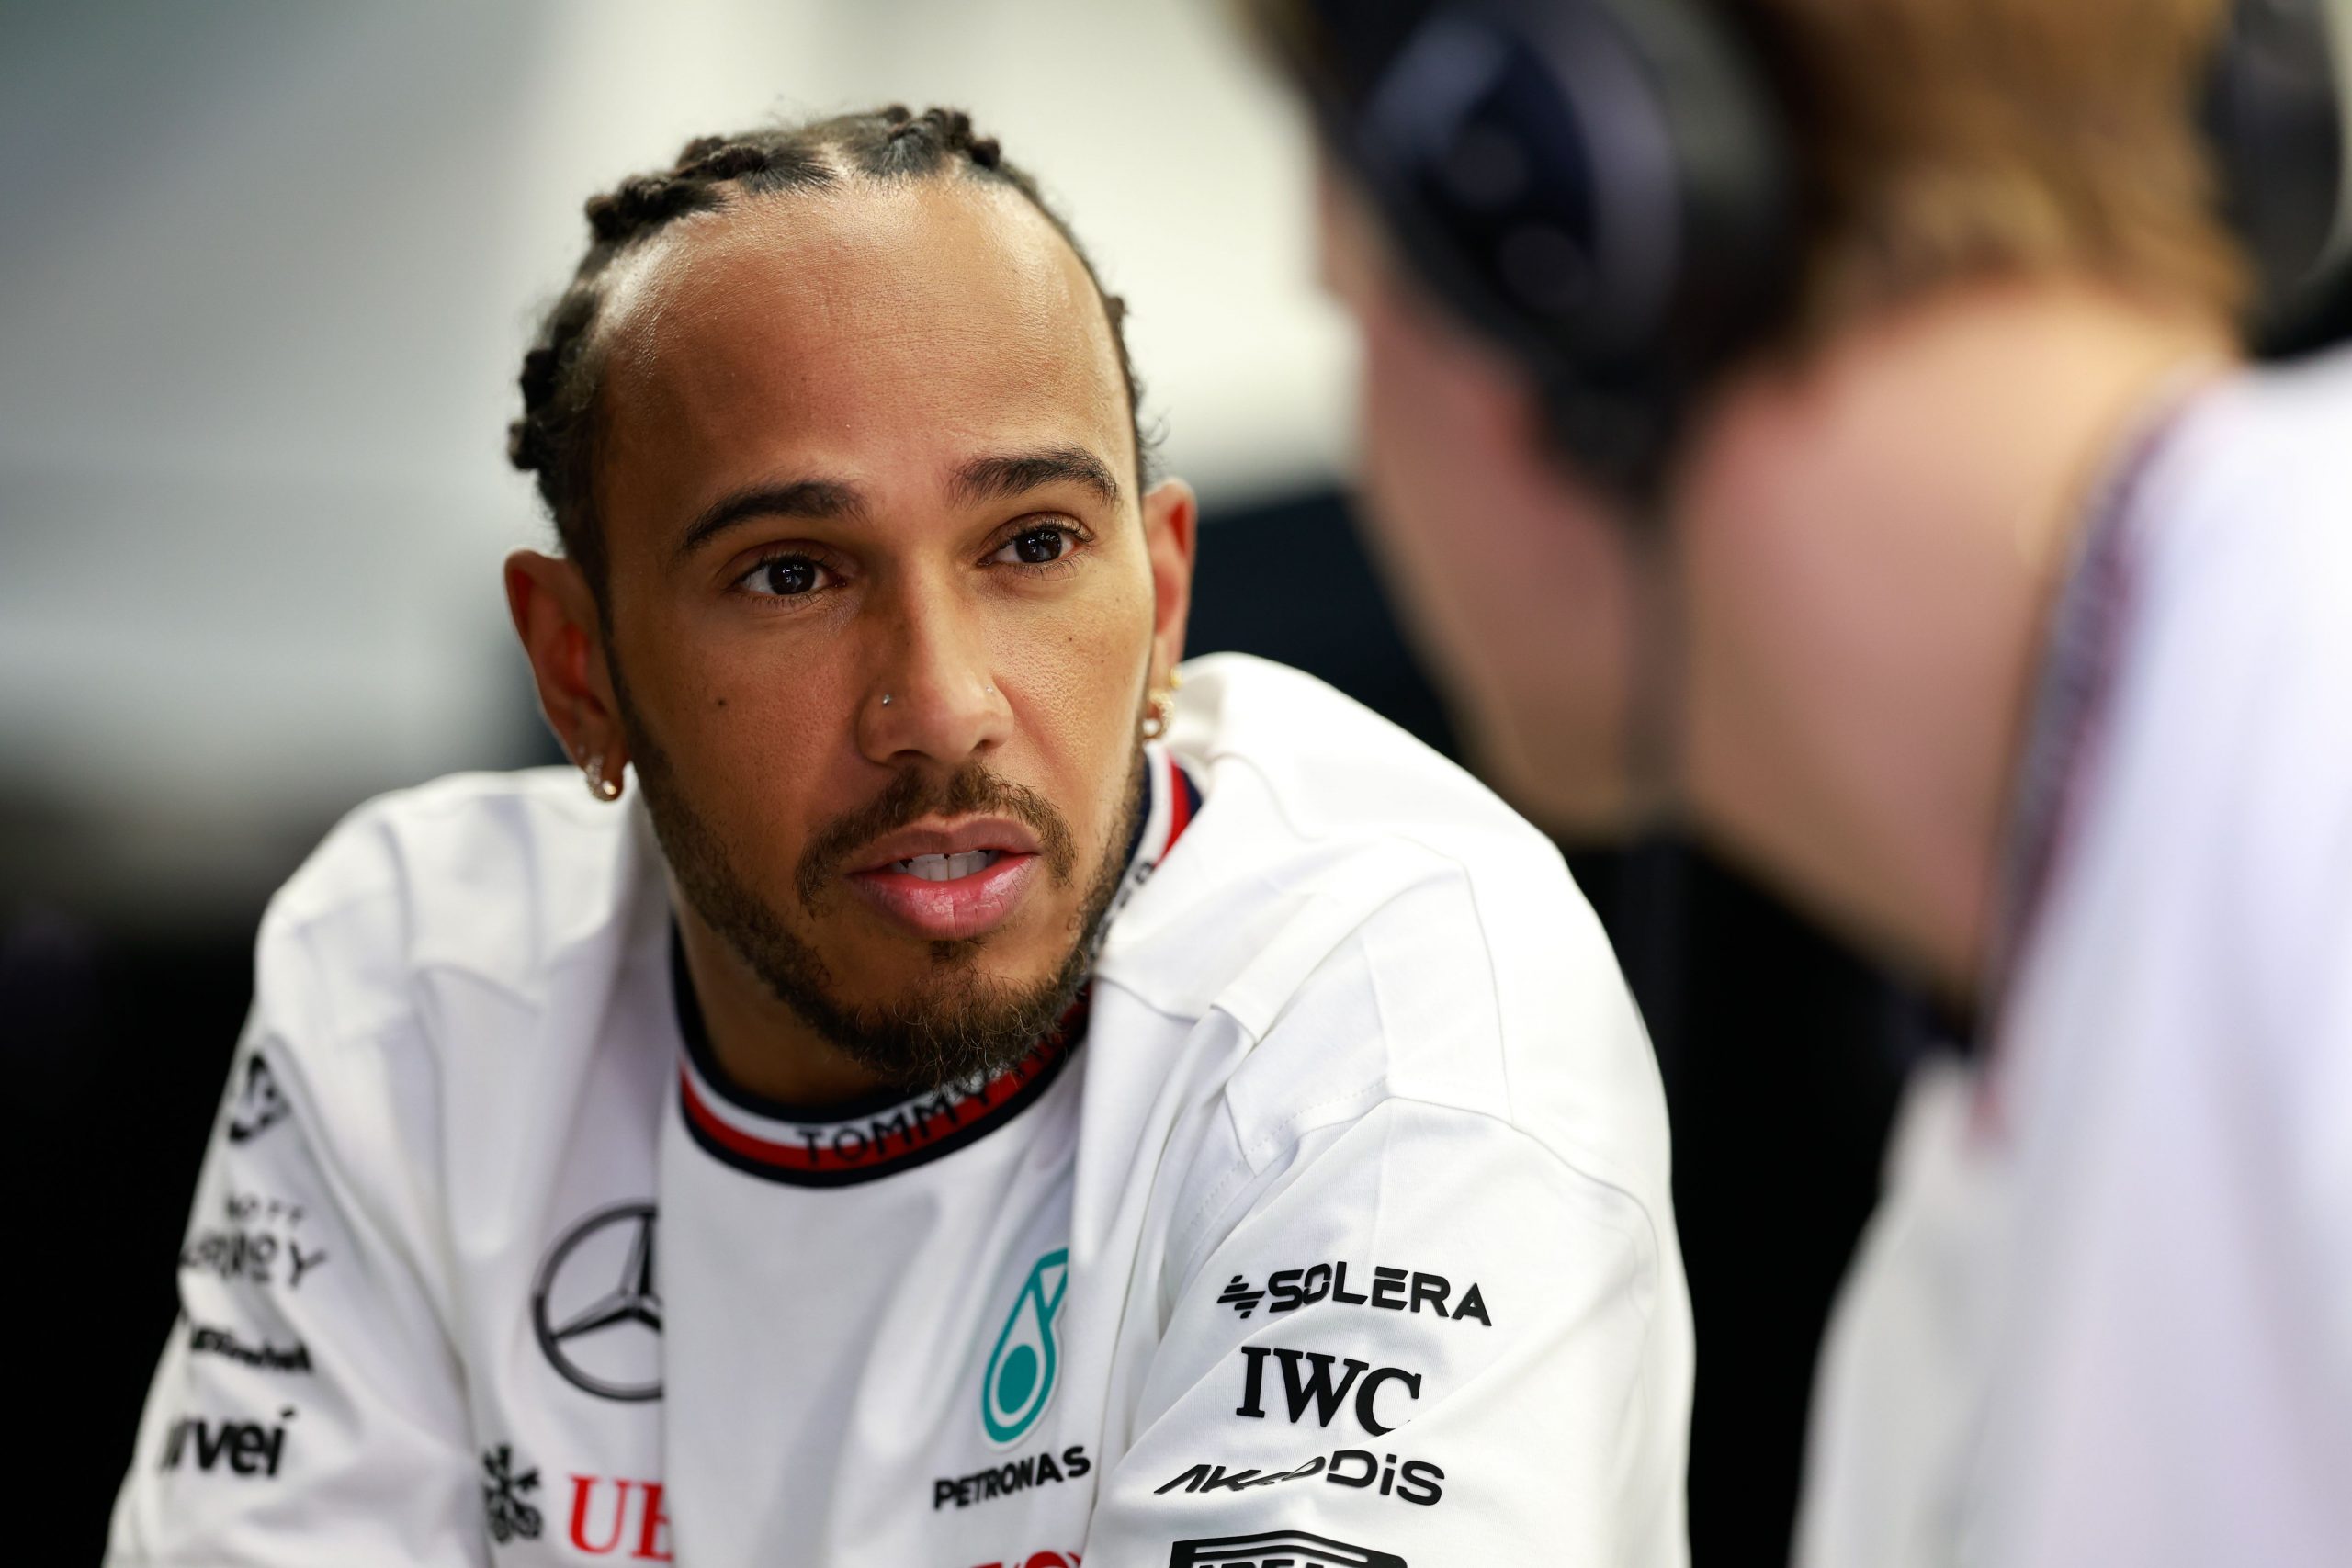 Mercedes unveil never-before-seen car feature for Lewis Hamilton as F1 fans ask ‘is this real?